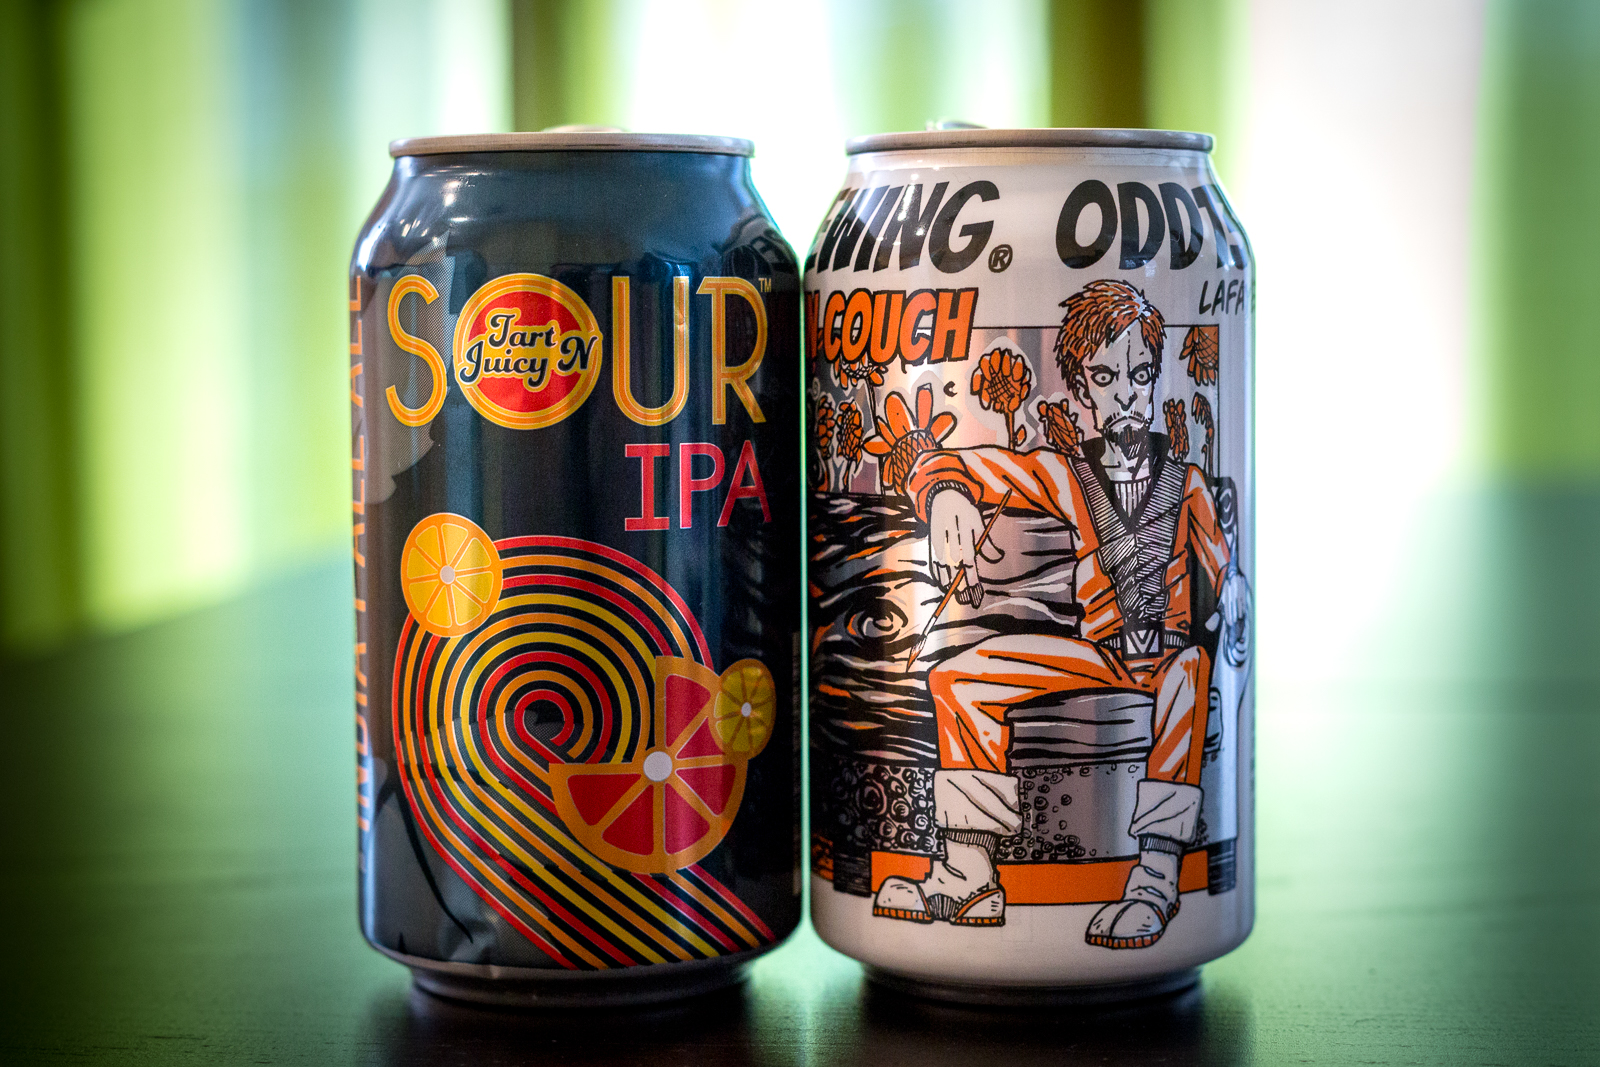 Epic Brewing Co. and Odd 13 Brewing